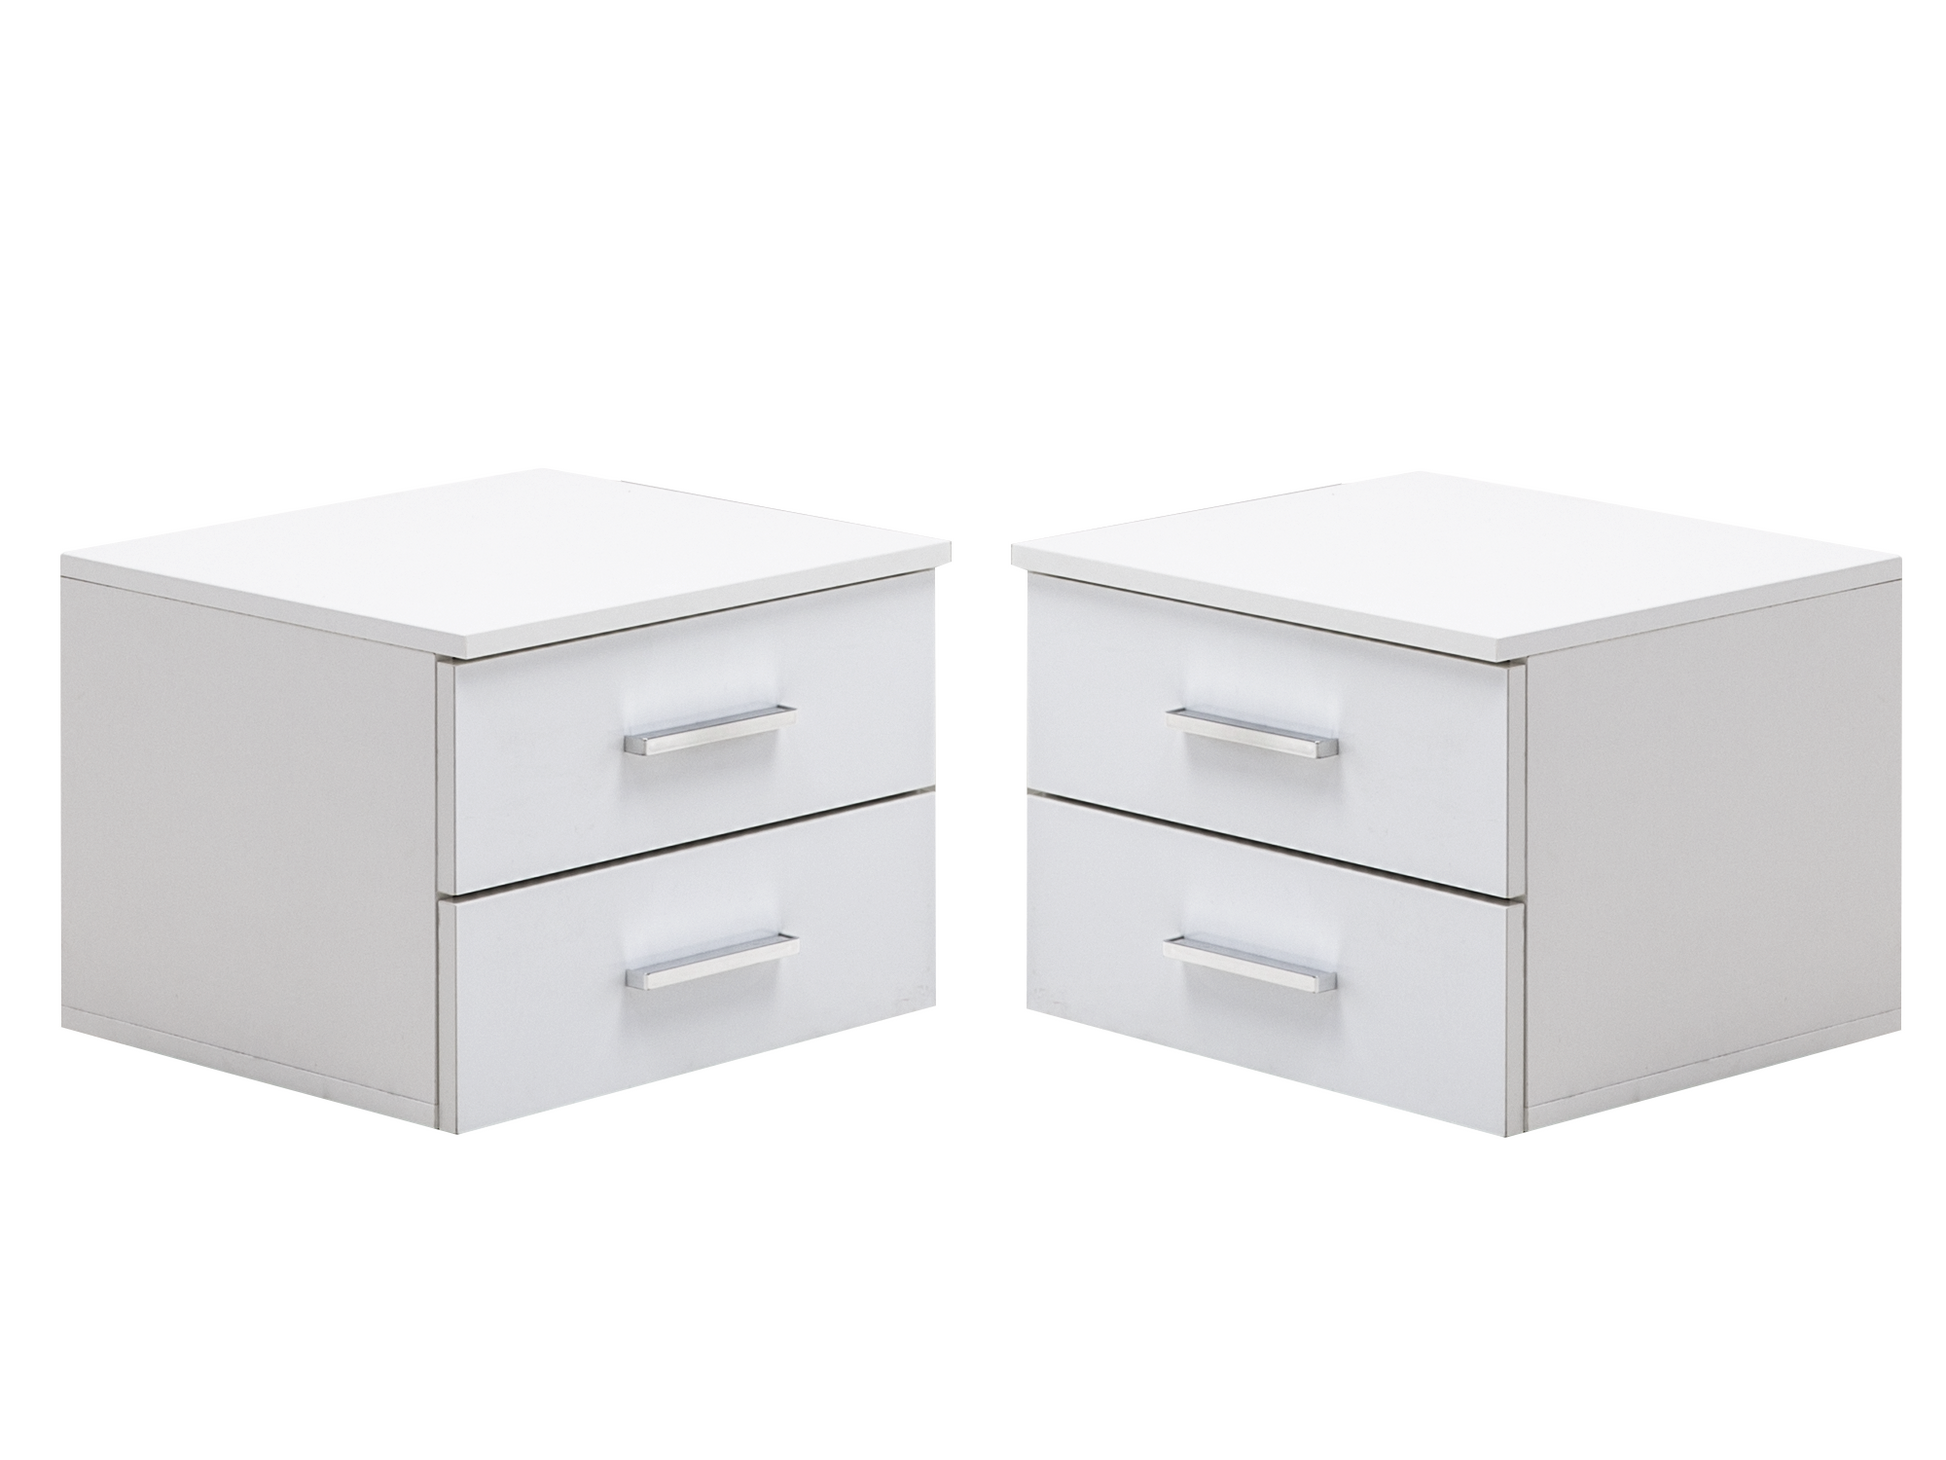 Siena 23 Pair of Bedside Cabinets All Homely